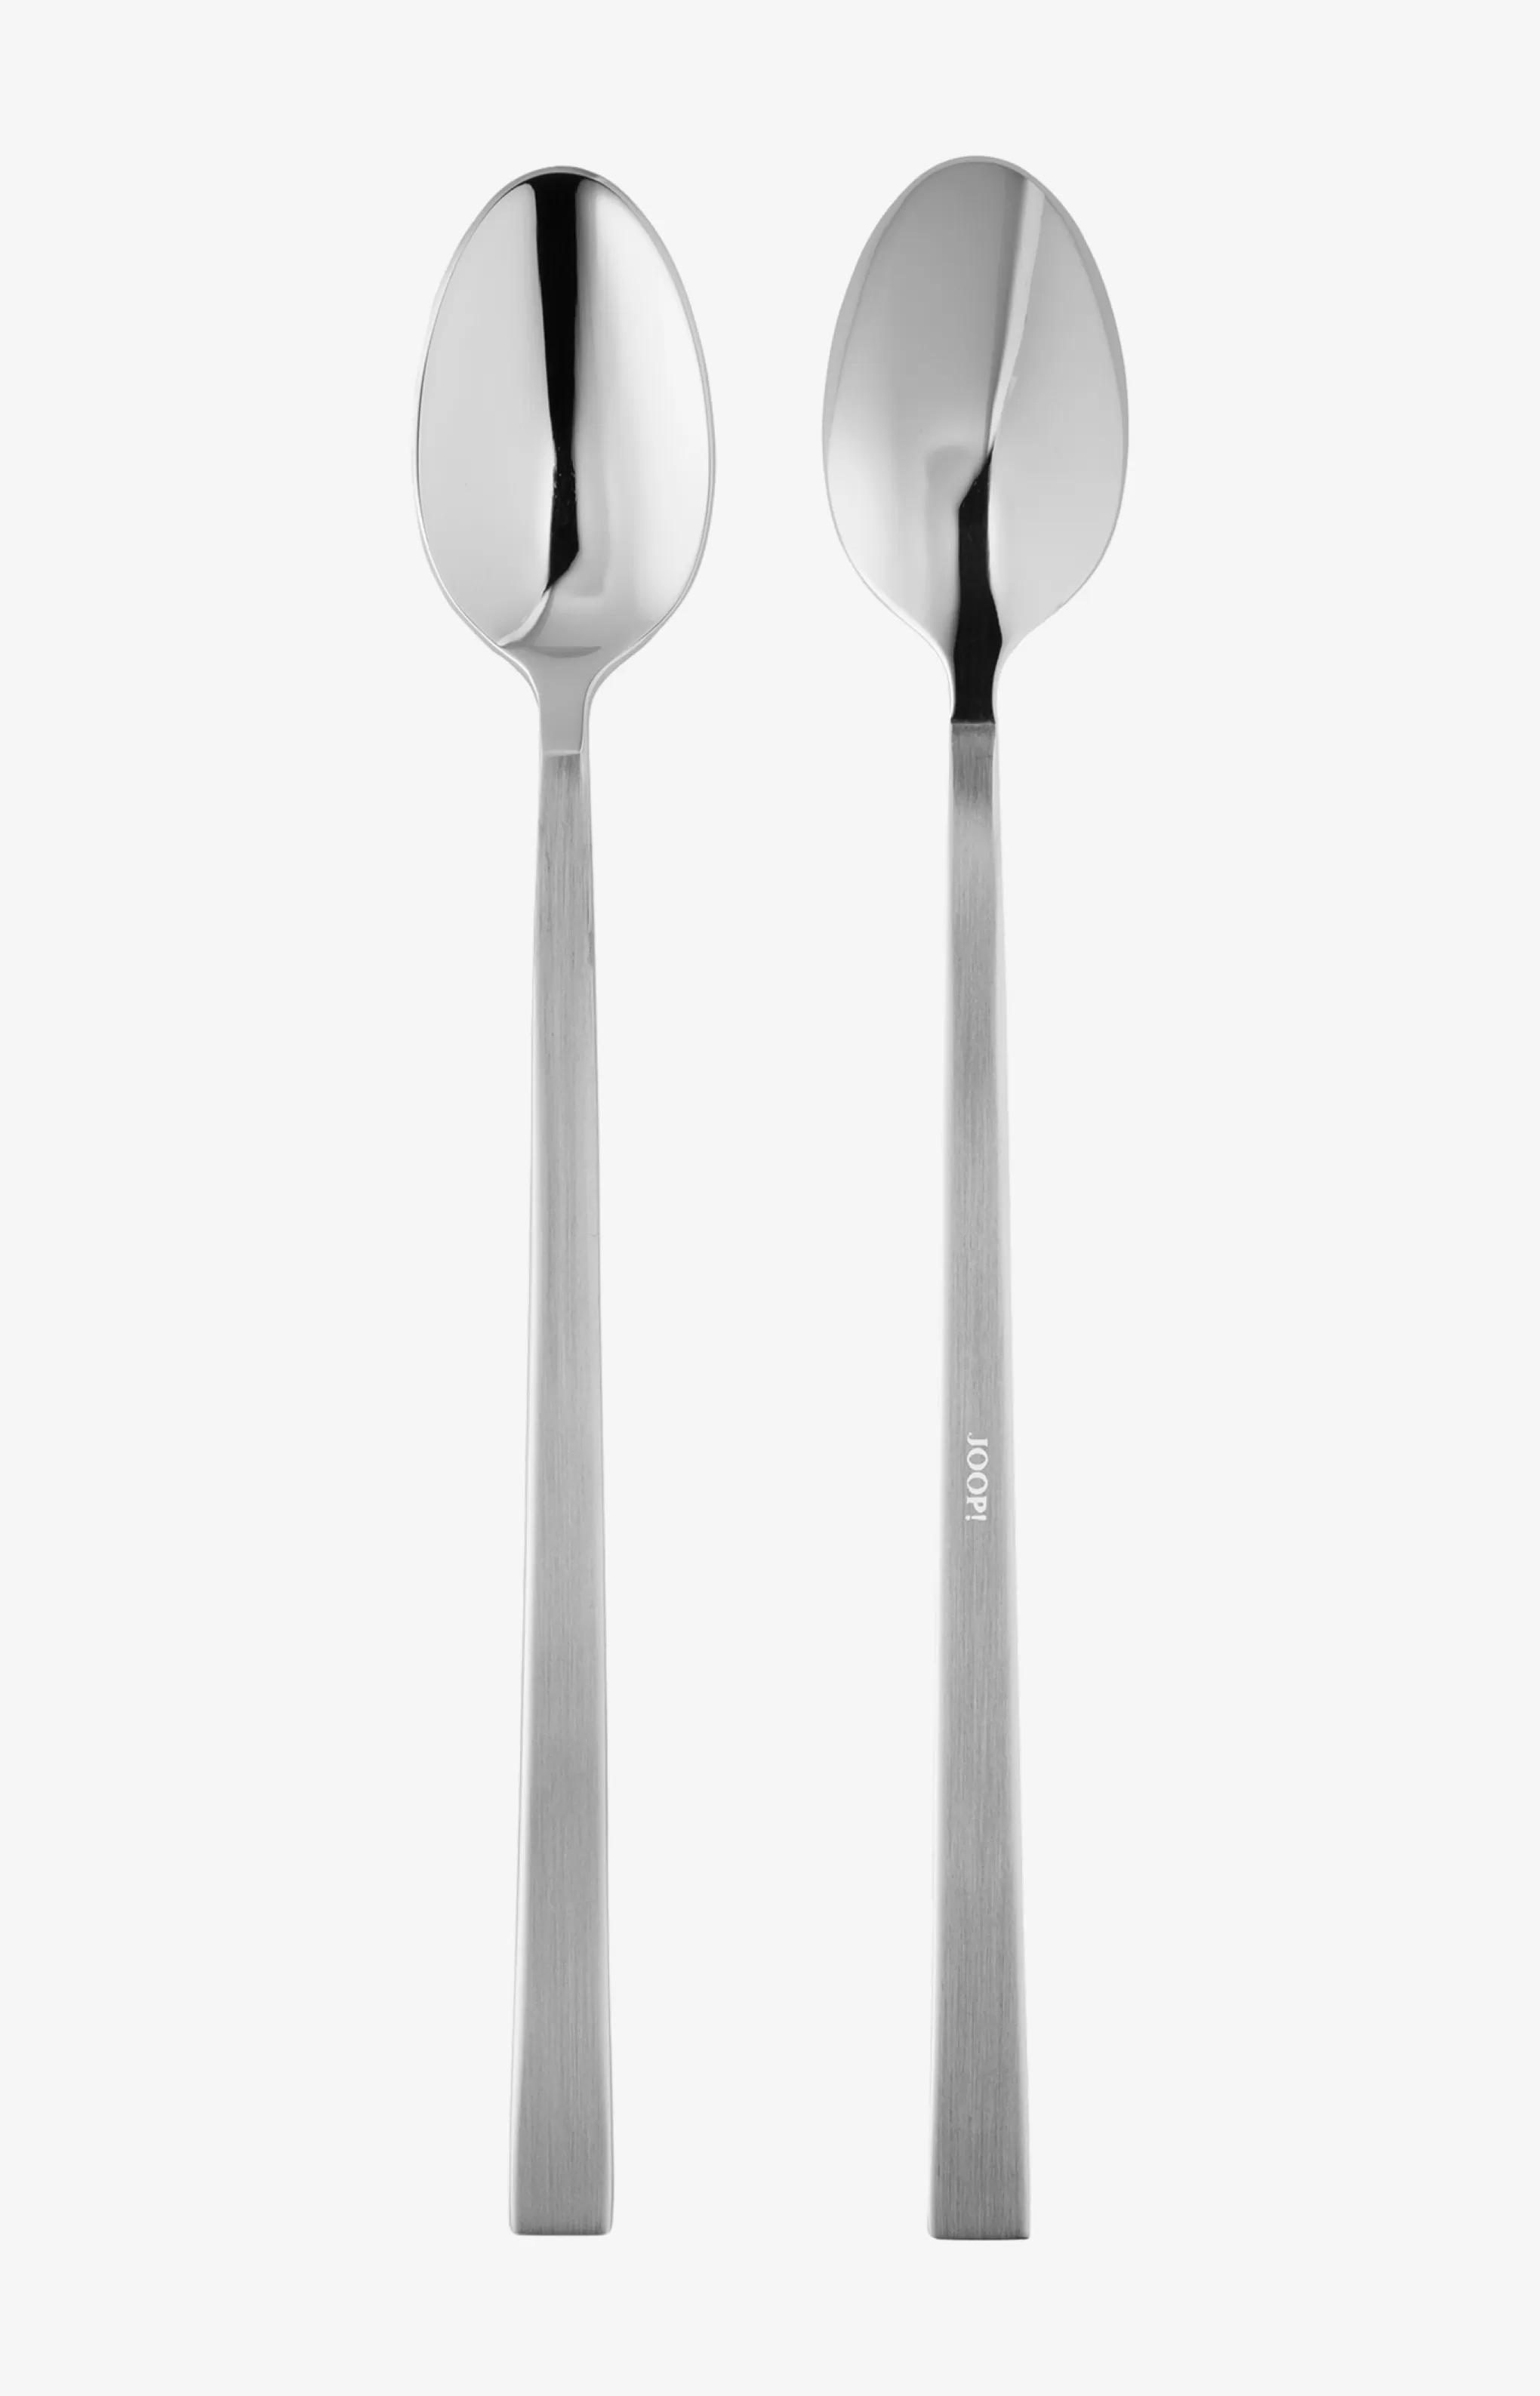 Cutlery | Discover Everything*JOOP Cutlery | Discover Everything Latte Macchiato Dining Glamour Spoon 4 pcs. - Satin Finish